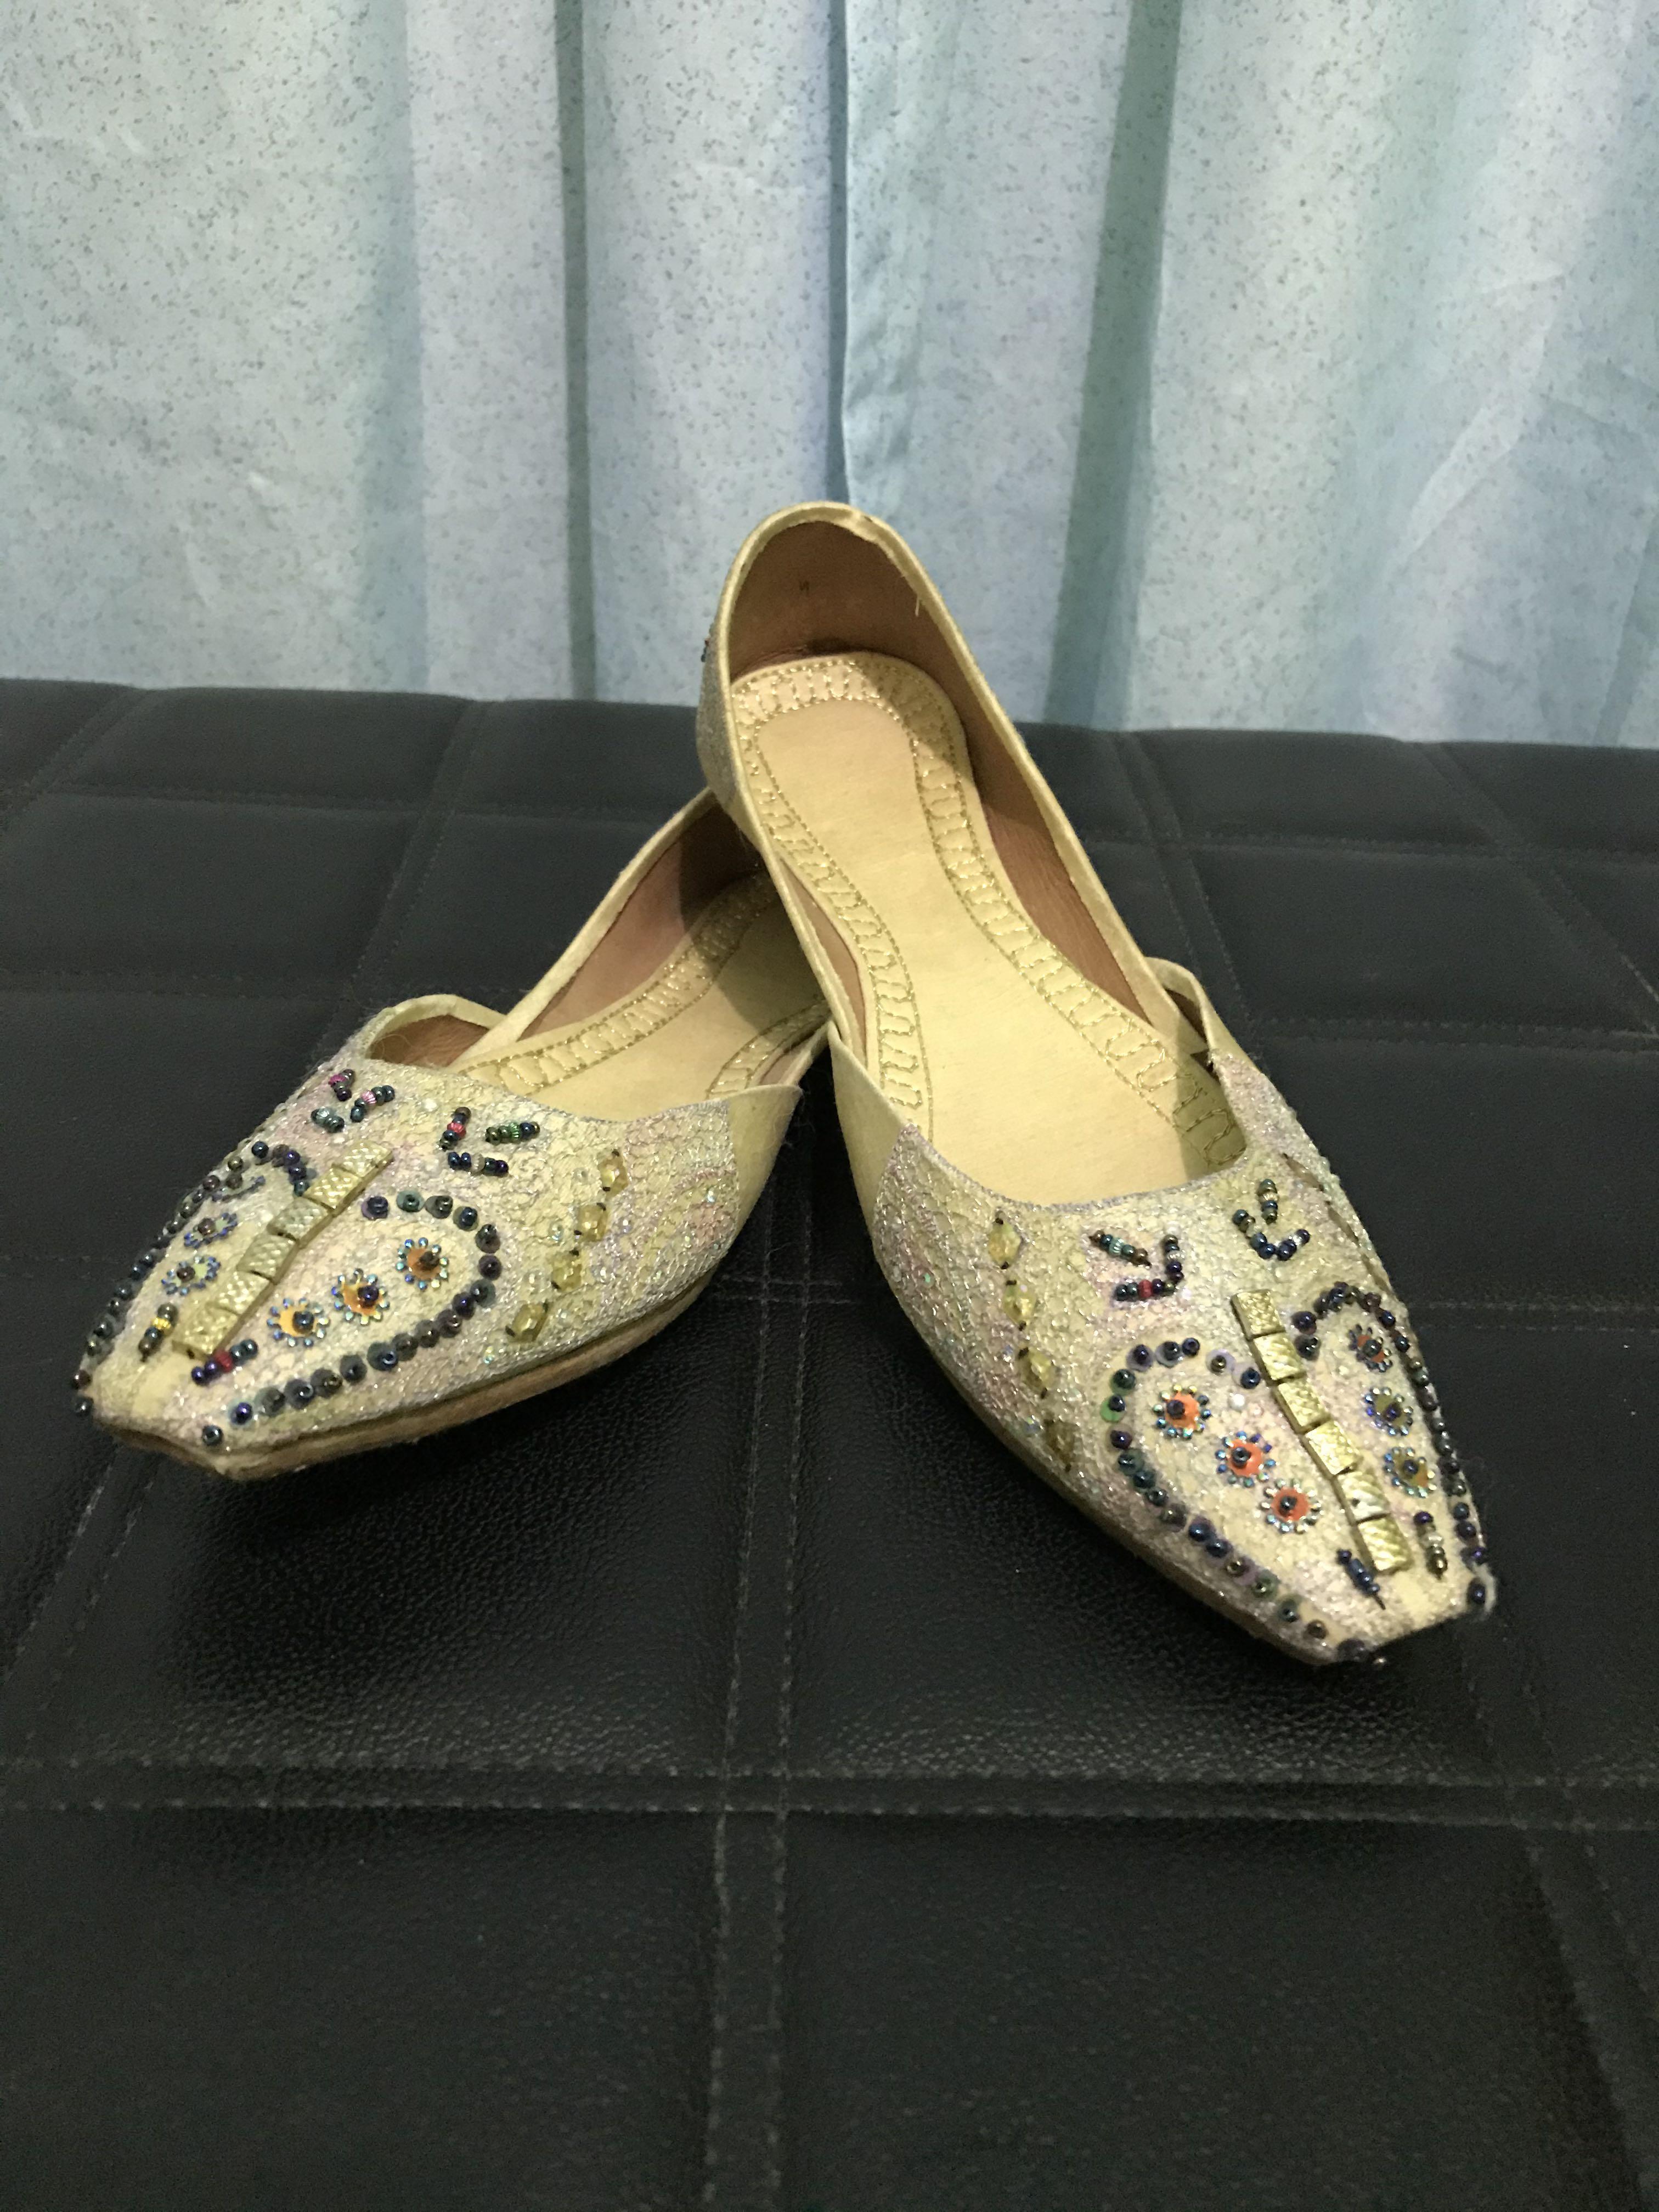 All Leather Flats, Women's Fashion 